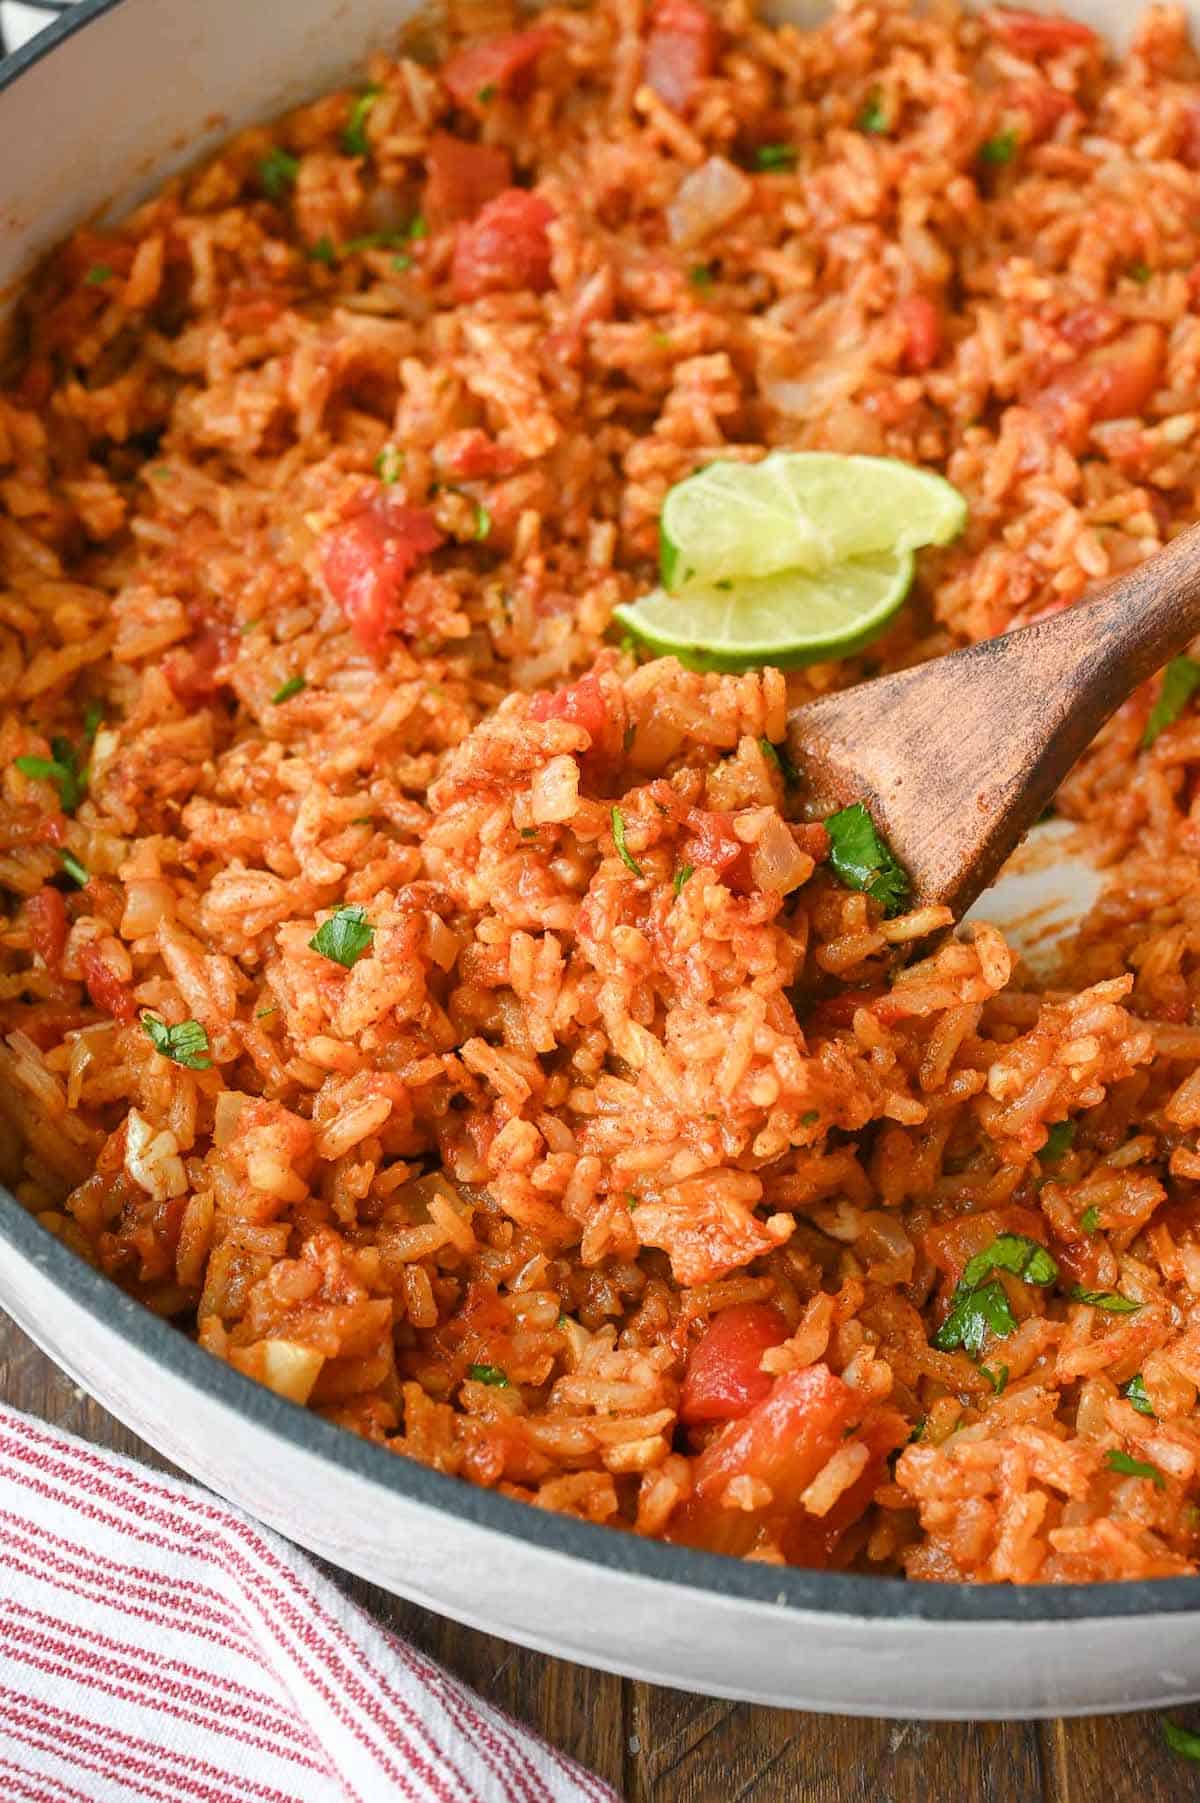 A wooden spoon scooping up some Mexican rice.